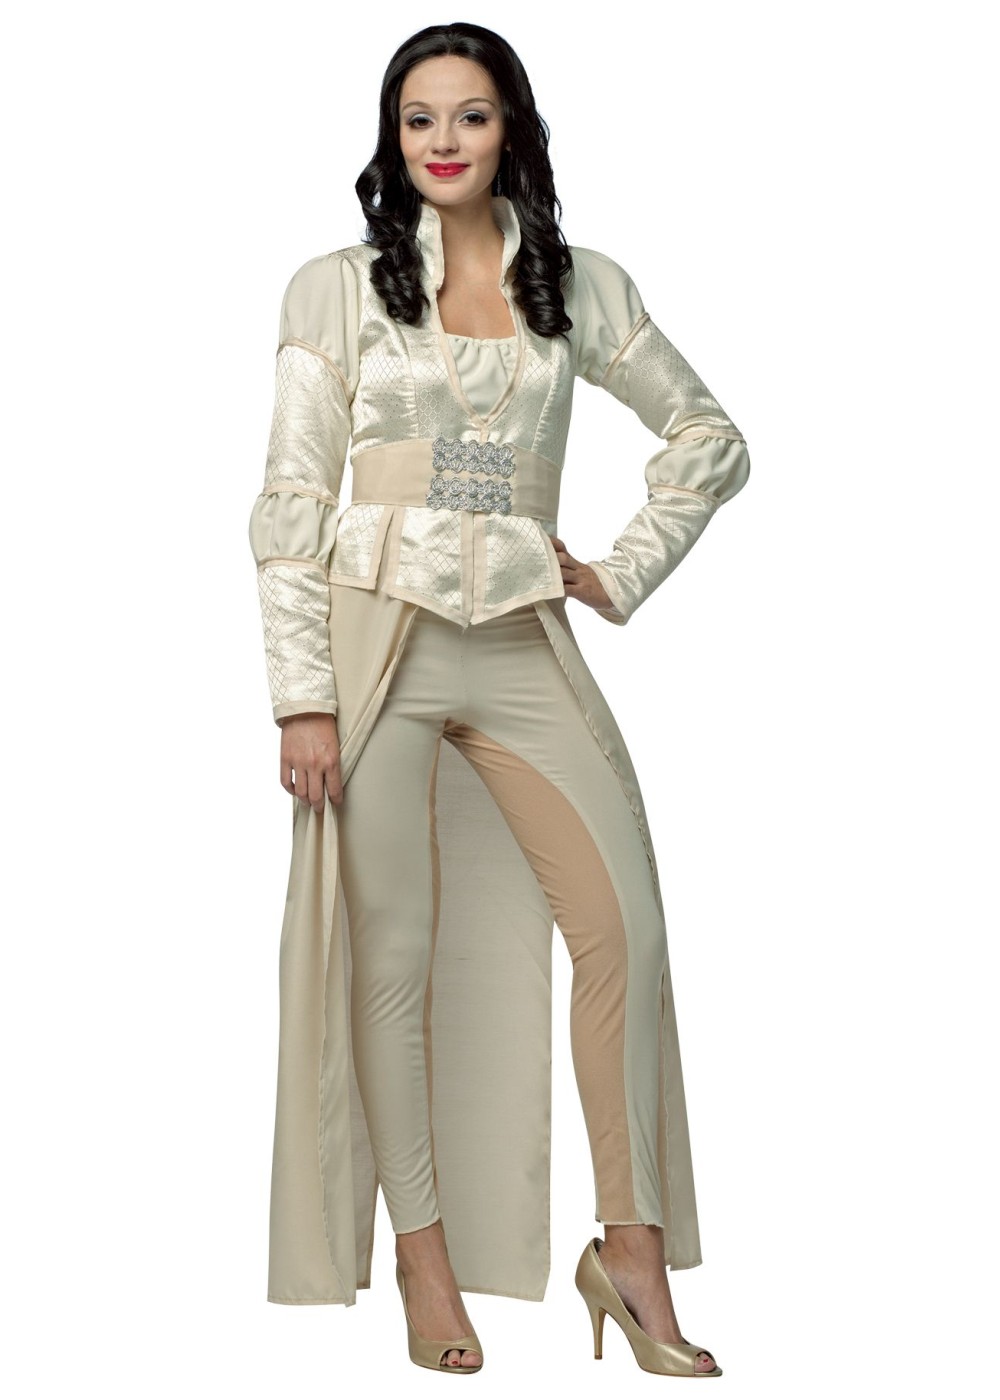 Once Upon a Time Snow White Character Costume - TV Show Costumes